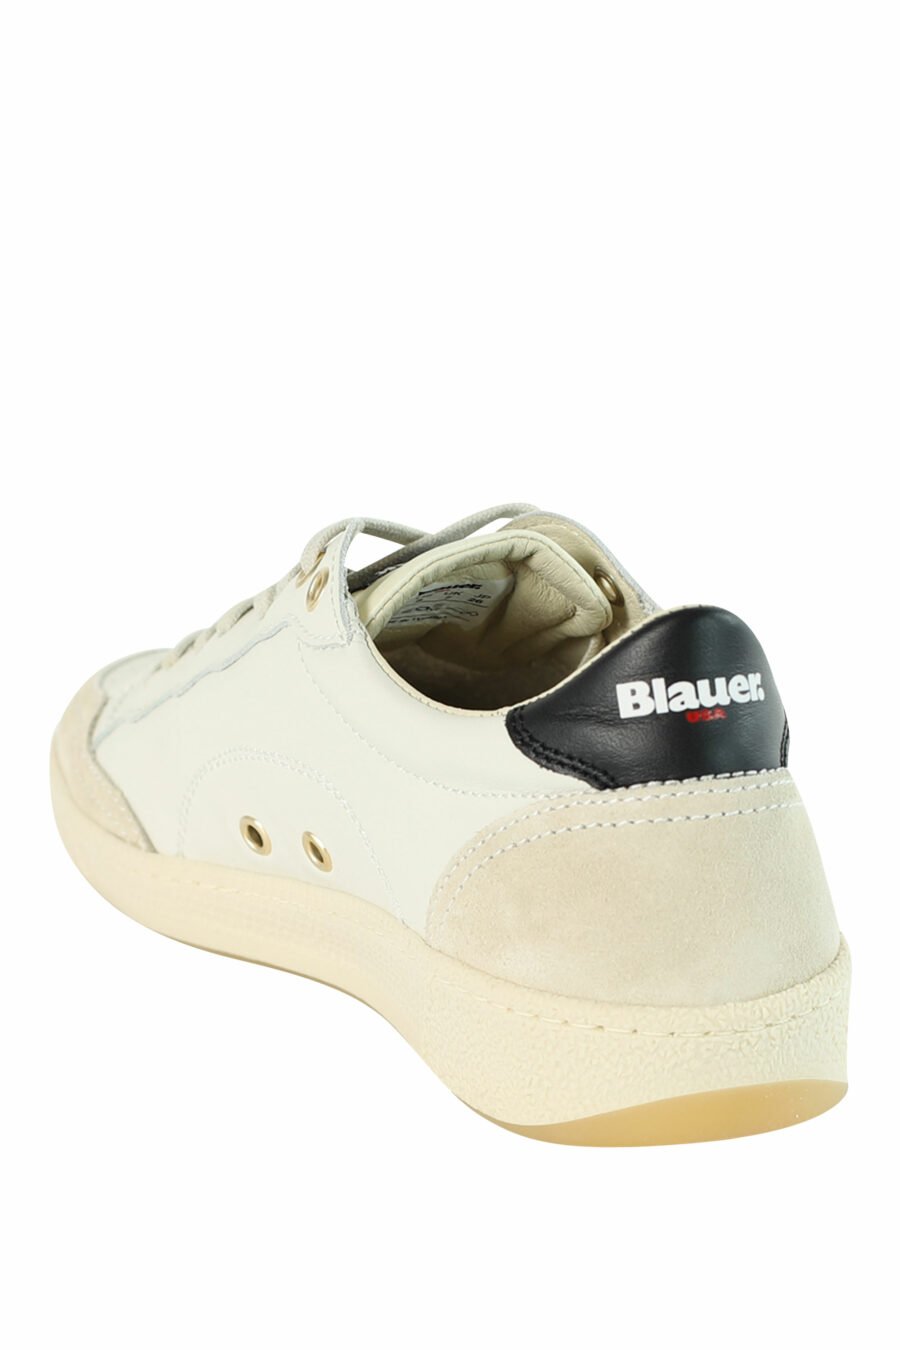 White "MURRAY" trainers with black details - 8058156497504 4